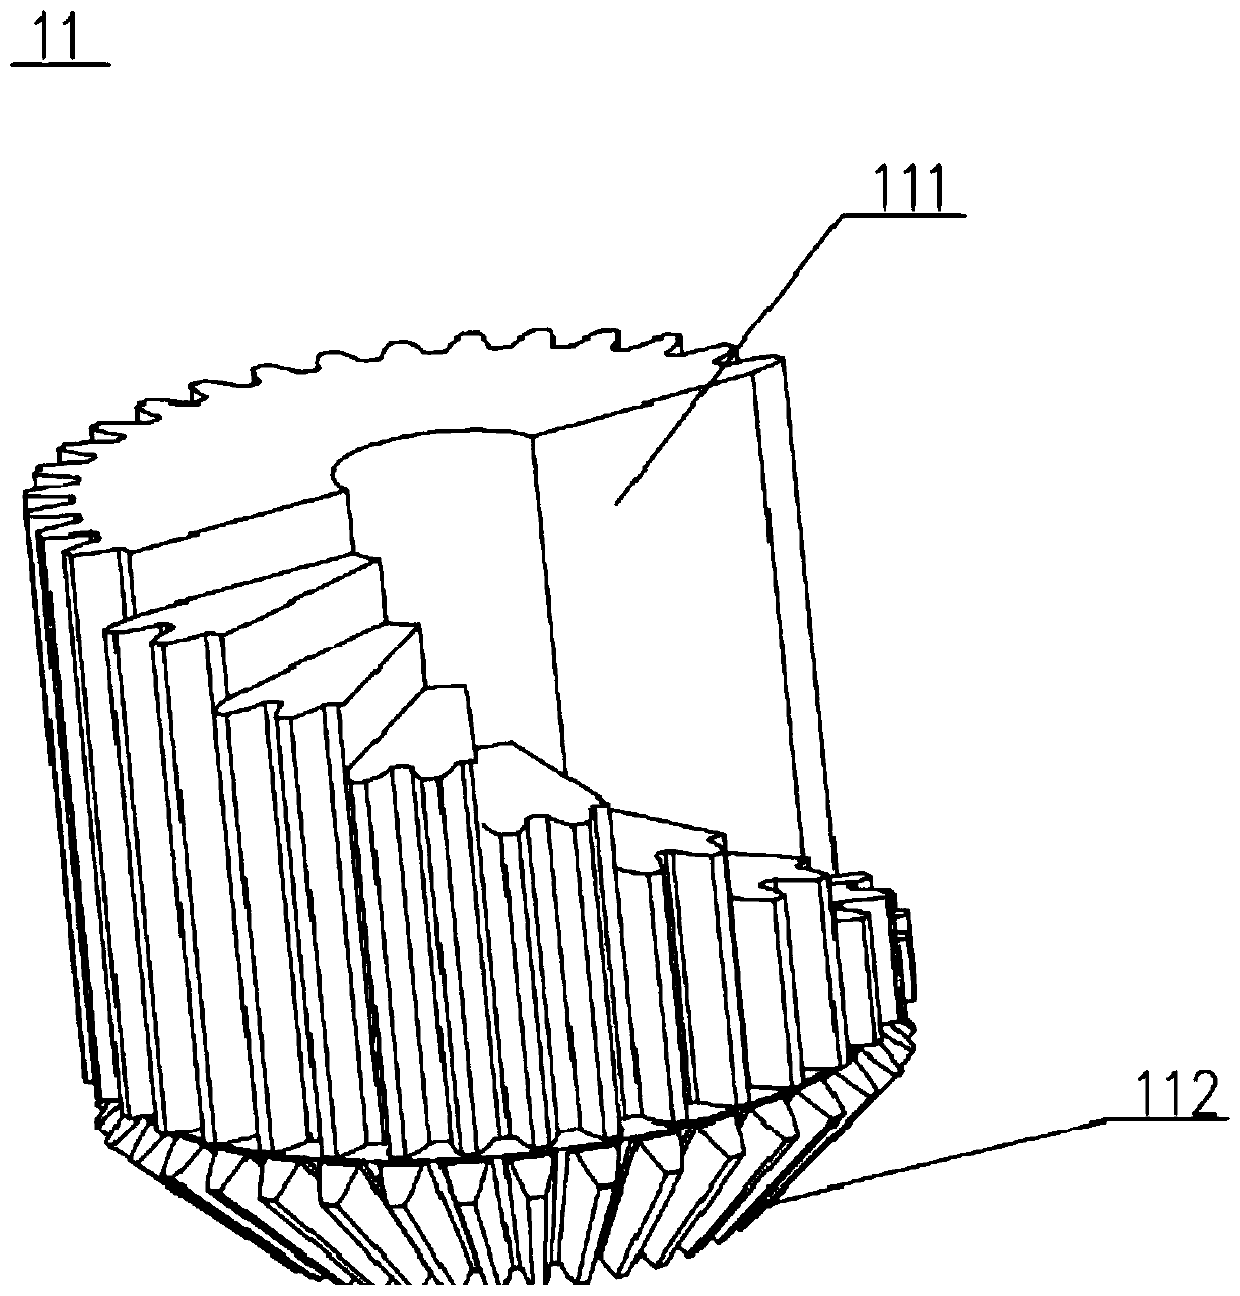 Disc-shaped unscrewing mechanism and partial discharge detection device